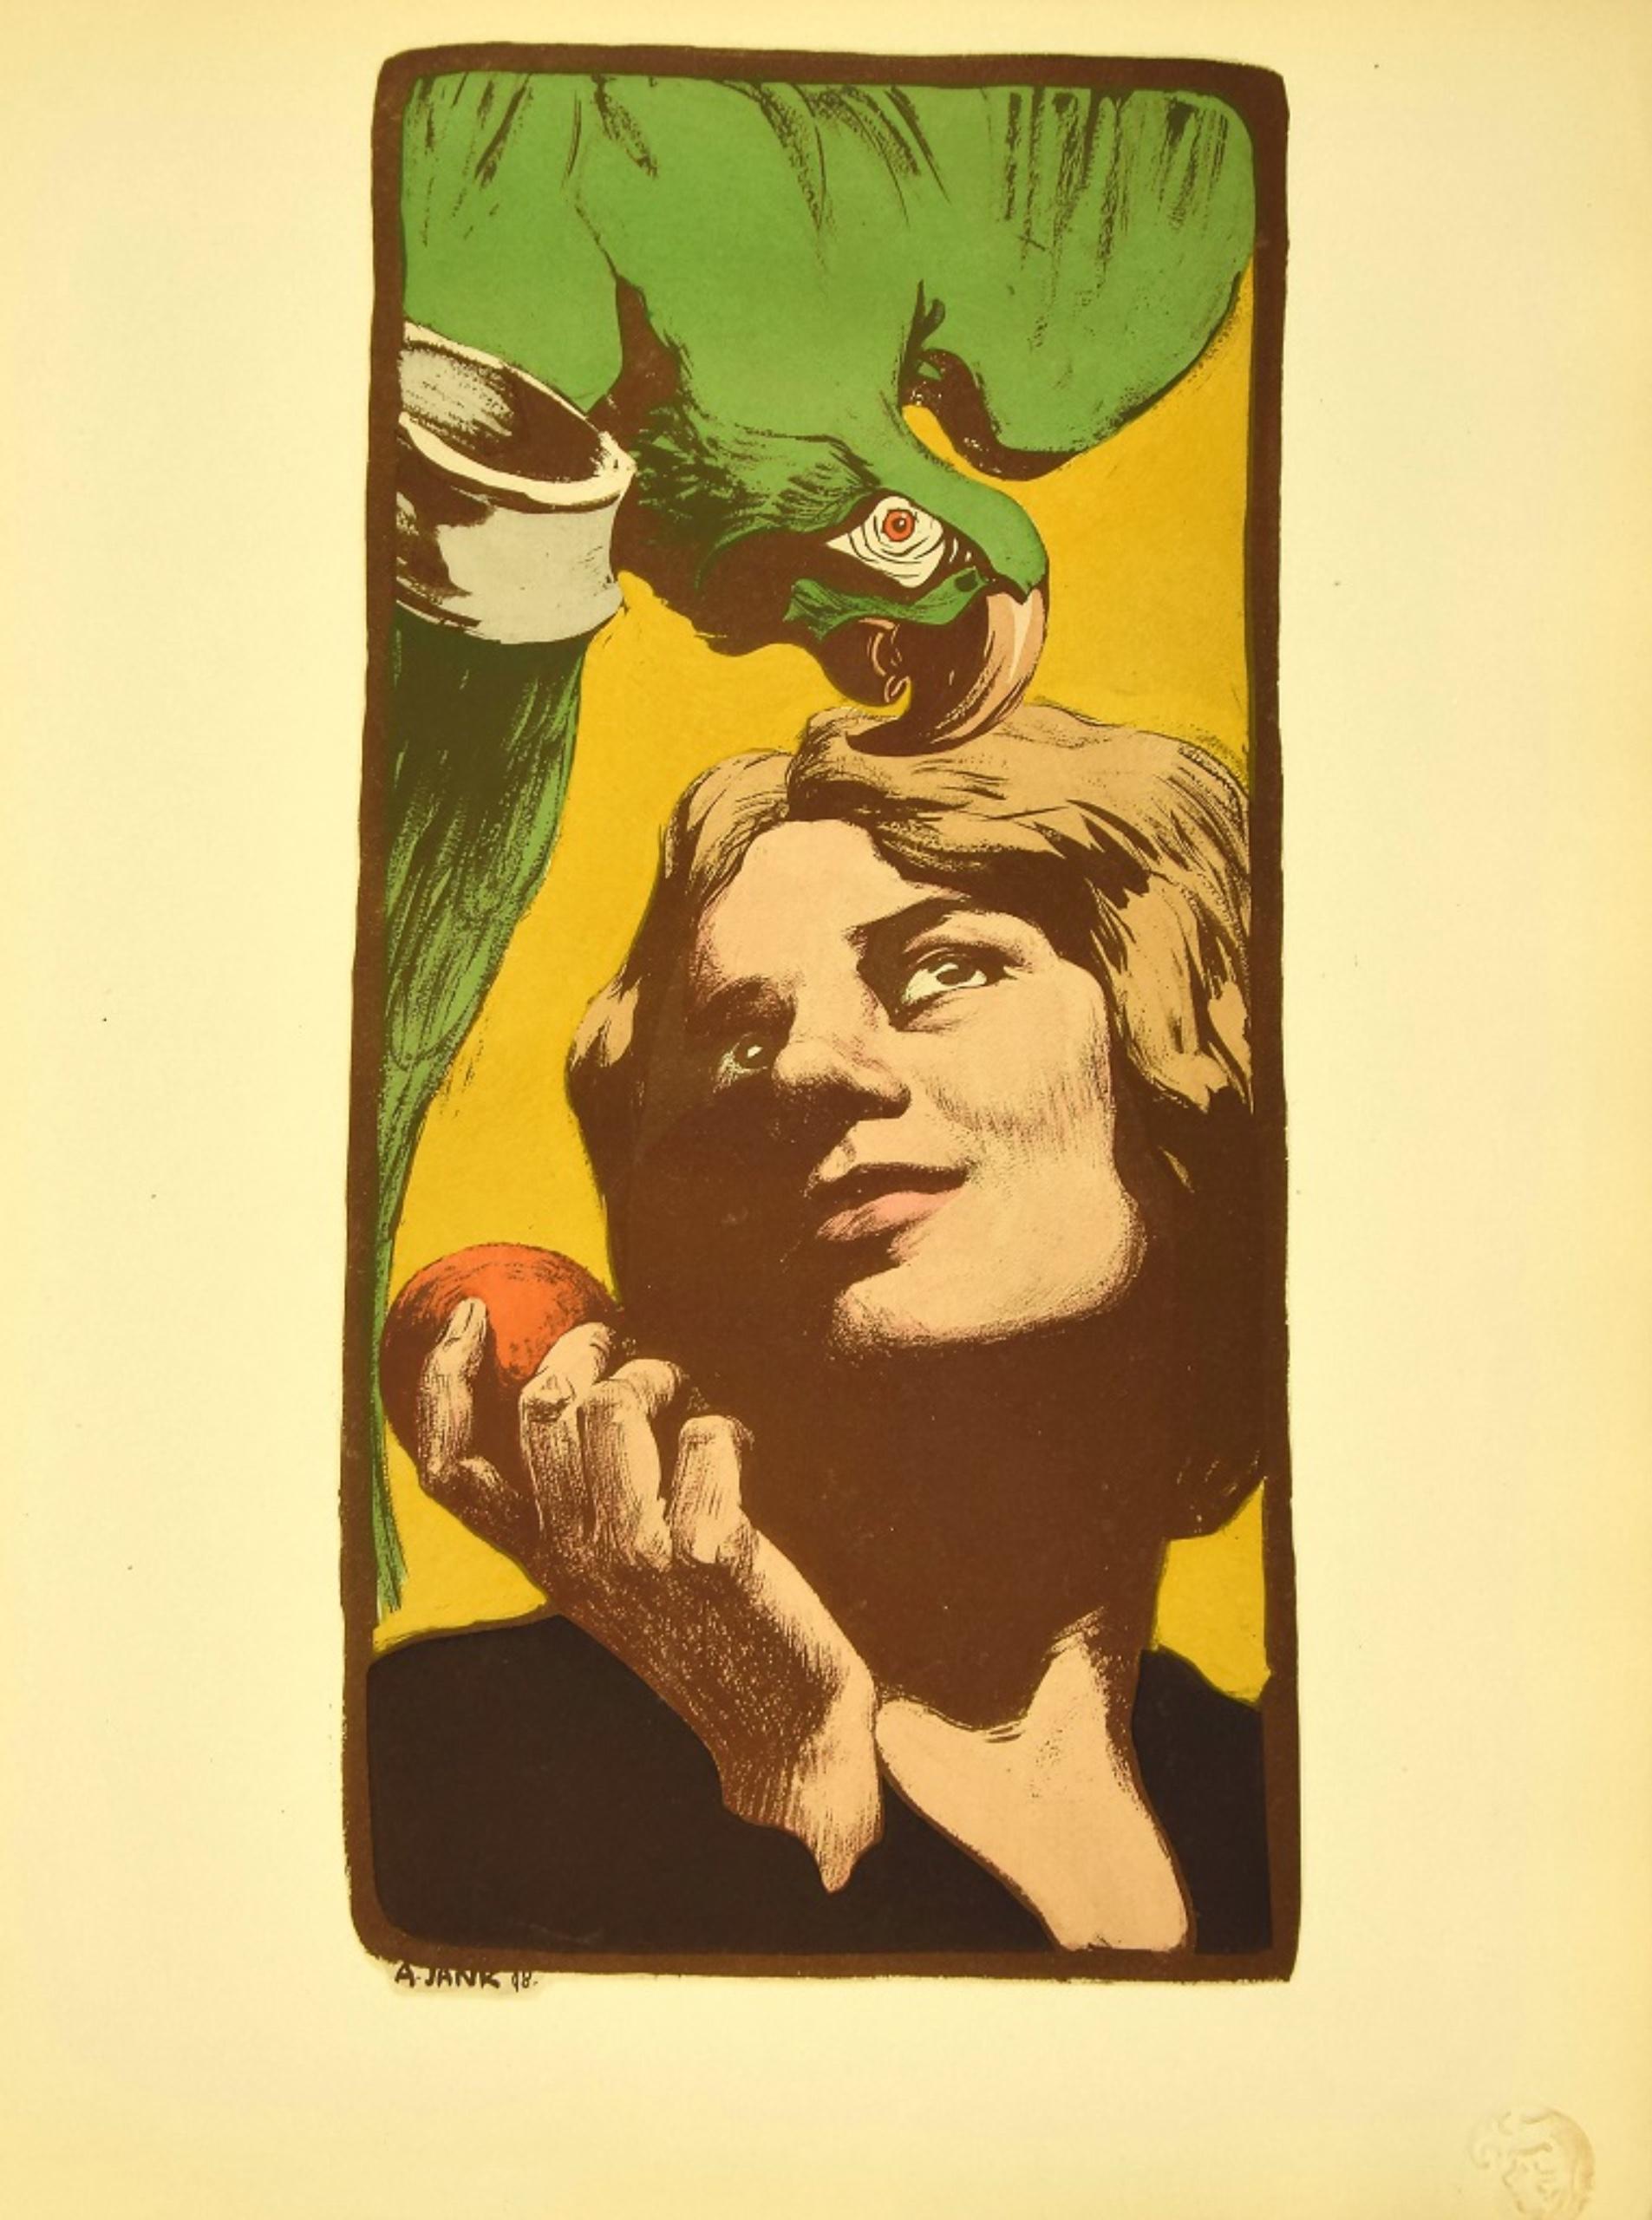 The Woman with the Parrot from L'Estampe Moderne is an original lithograph realized by A. Yank in 1898

The artwork is from the issue L'Estampe Moderne n.19, November 1898

Original title: La Femme au Perroquet

The print has the official dry stamp